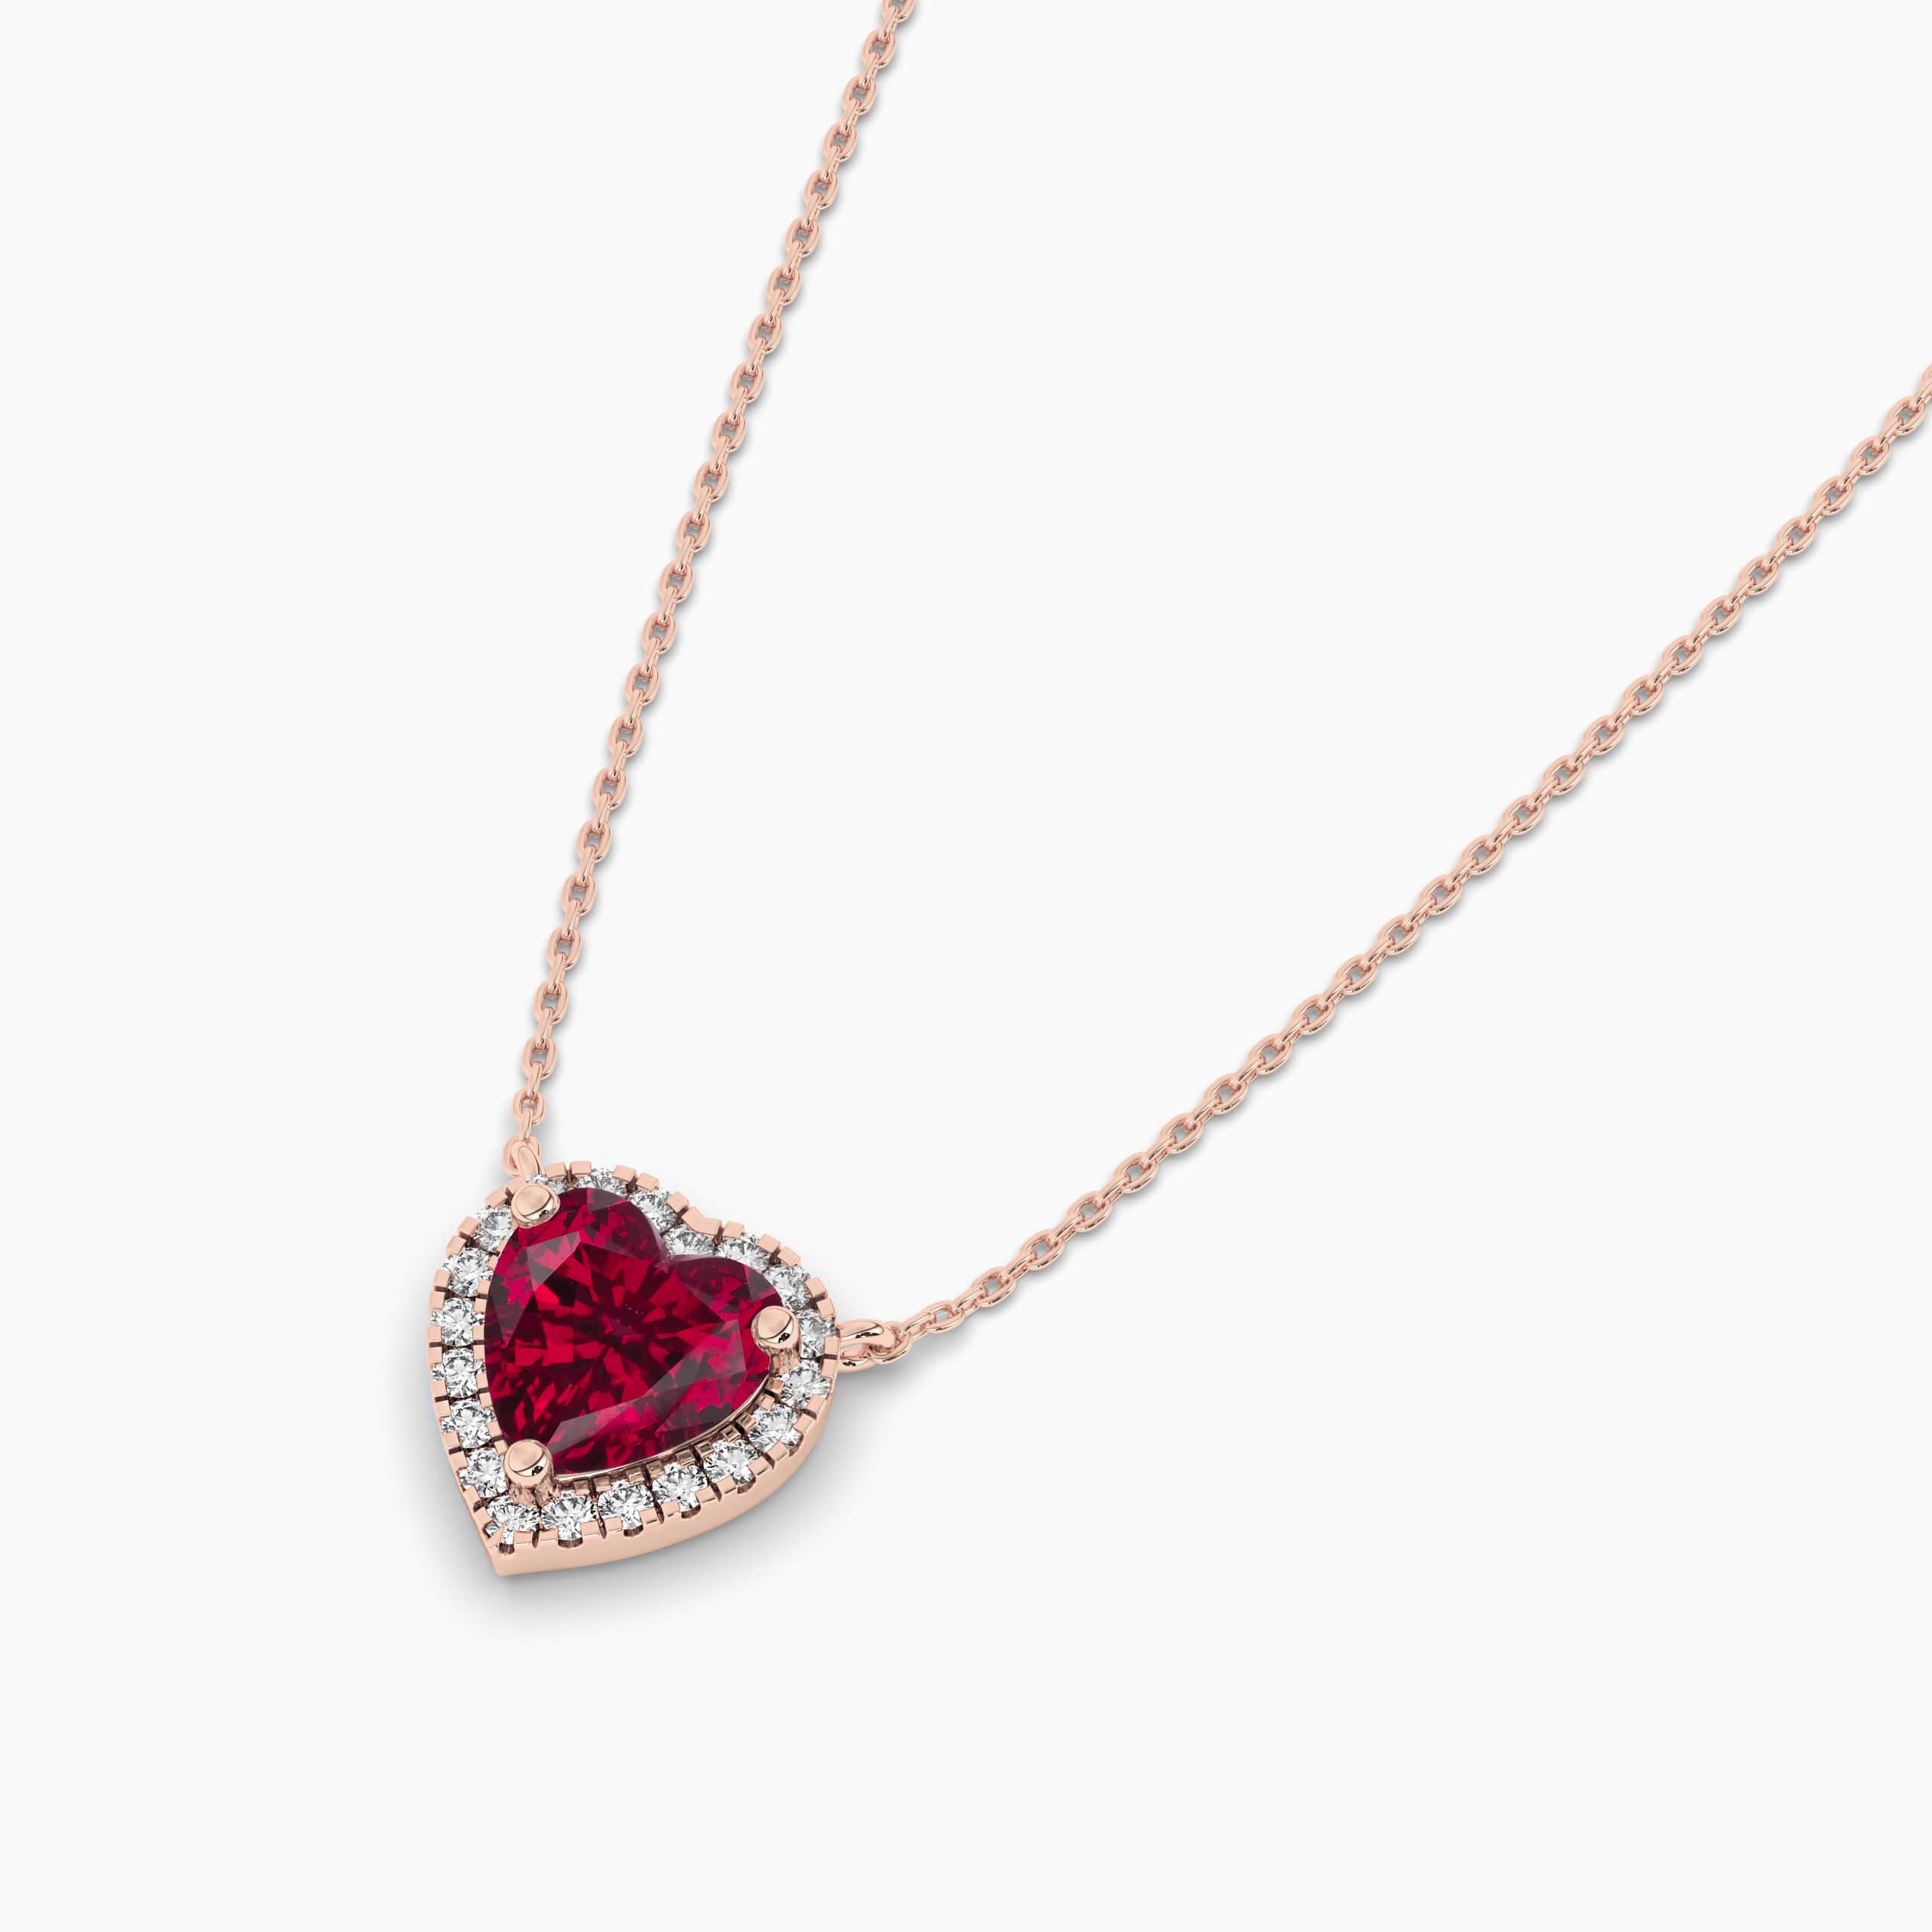 RUBY HEART NECKLACE WITH DIAMOND HALO IN ROSE GOLD